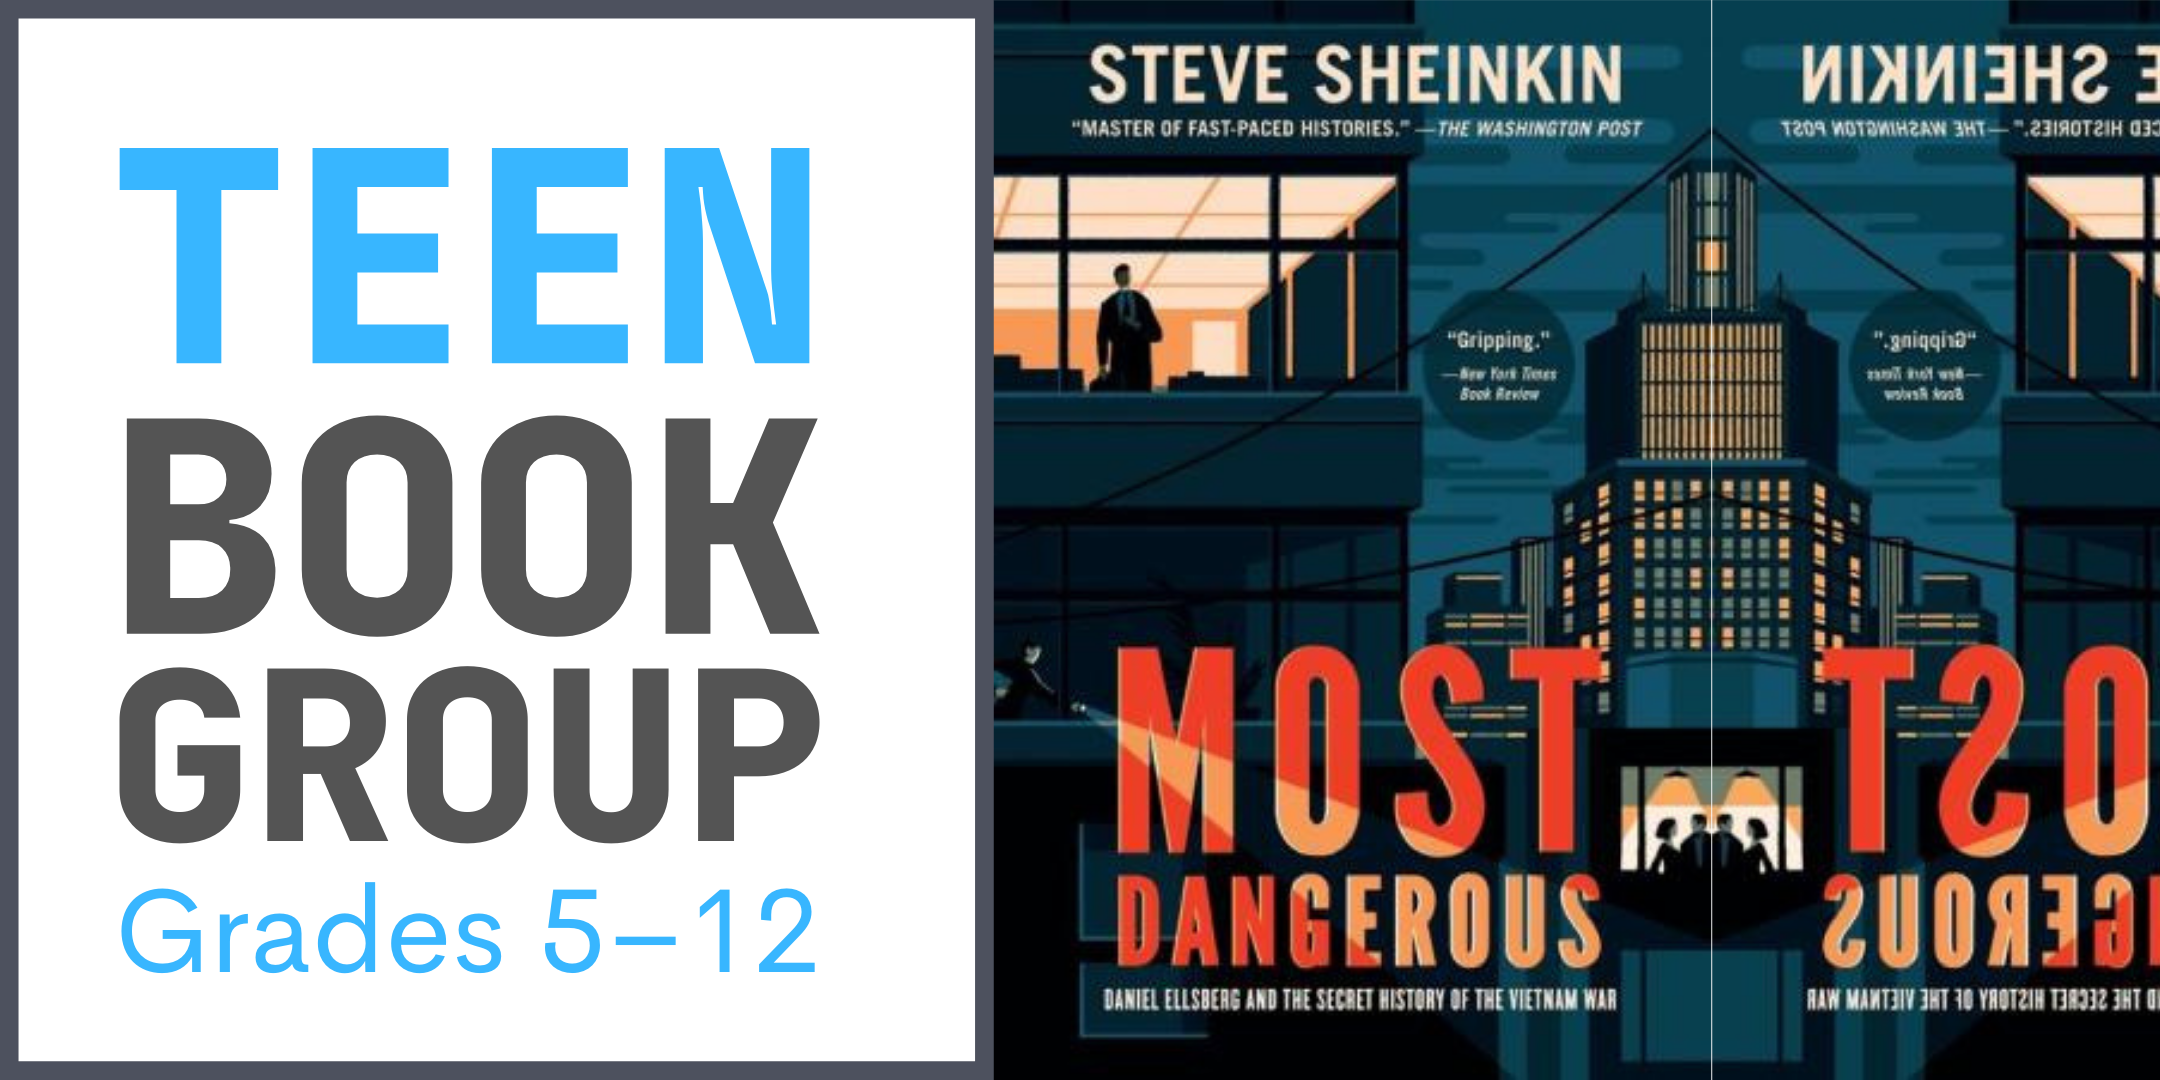 Teen Book Group: Grades 5-12 featuring Most Dangerous image